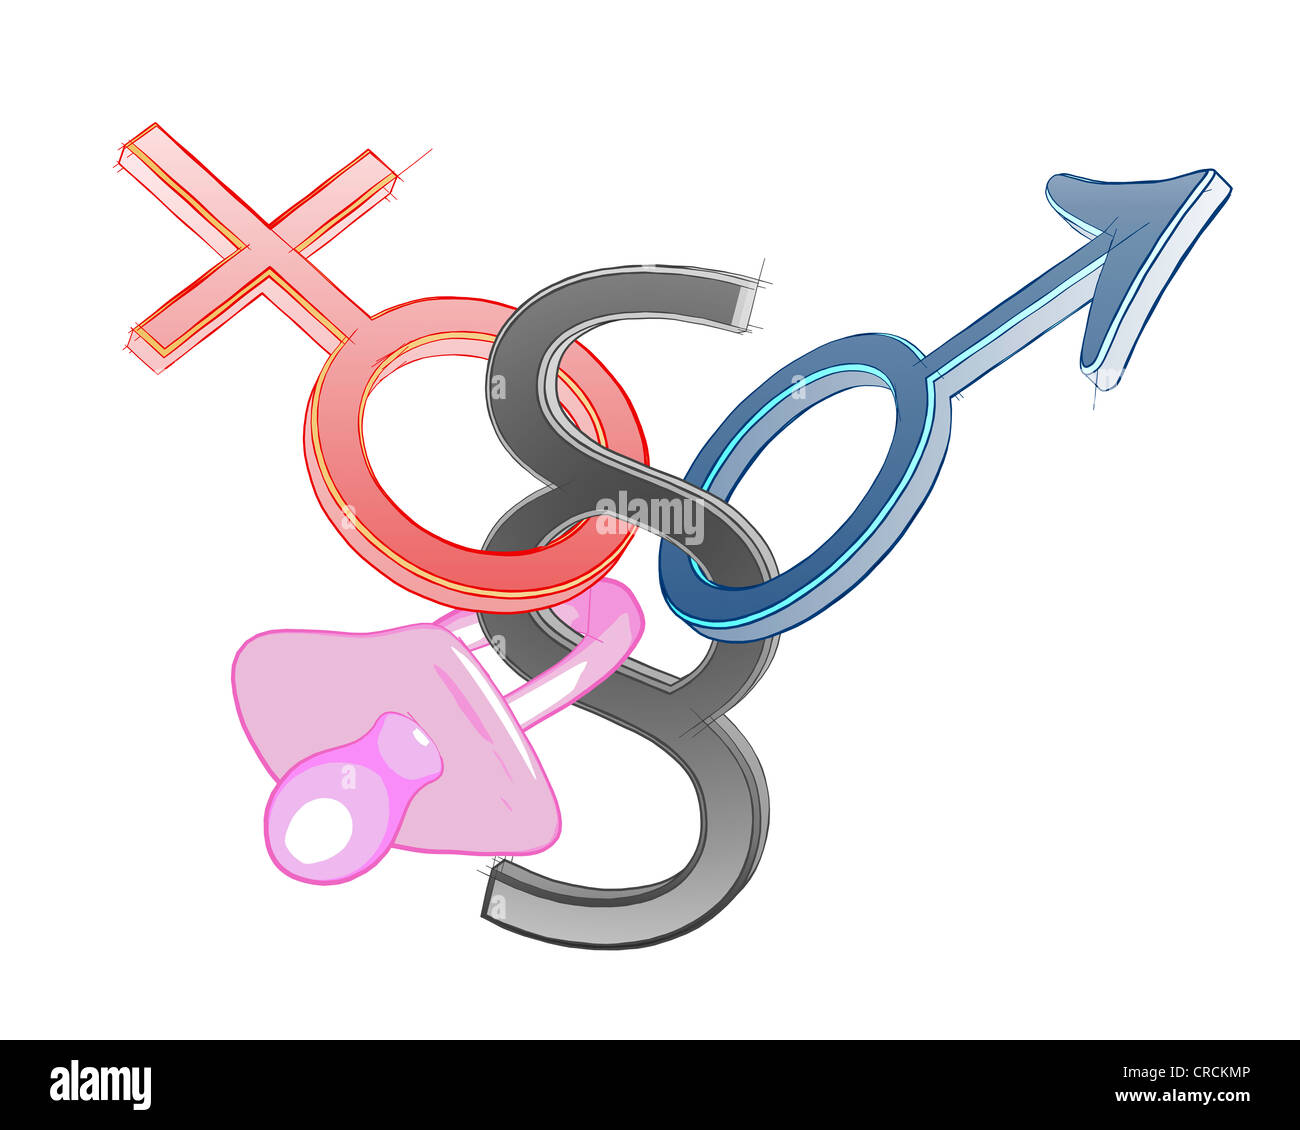 Mars and Venus symbols connected to a pacifier and a German legal paragraph symbol, illustration Stock Photo